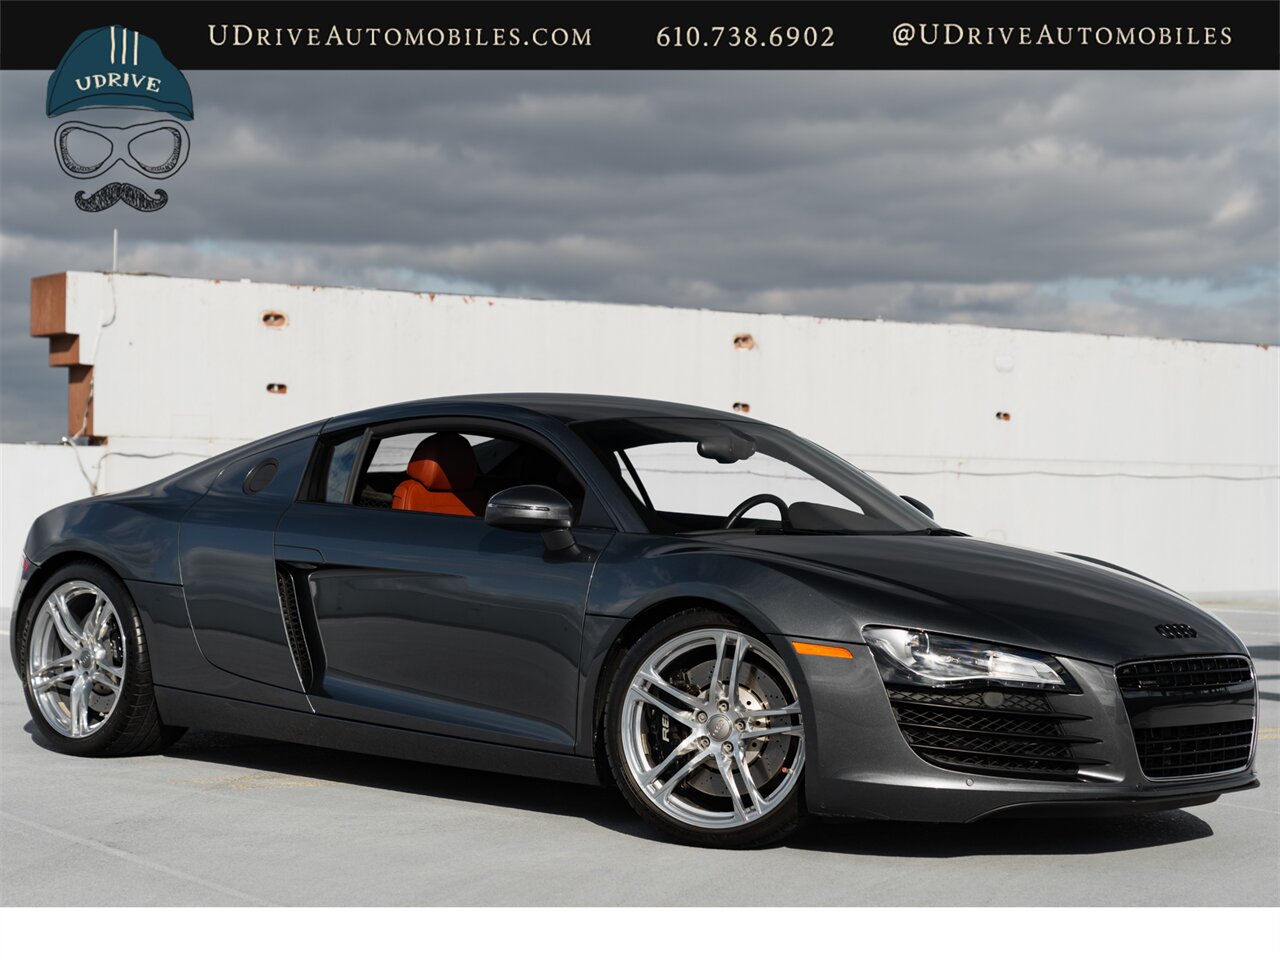 2009 Audi R8 Quattro  4.2 V8 6 Speed Manual 15k Miles - Photo 2 - West Chester, PA 19382